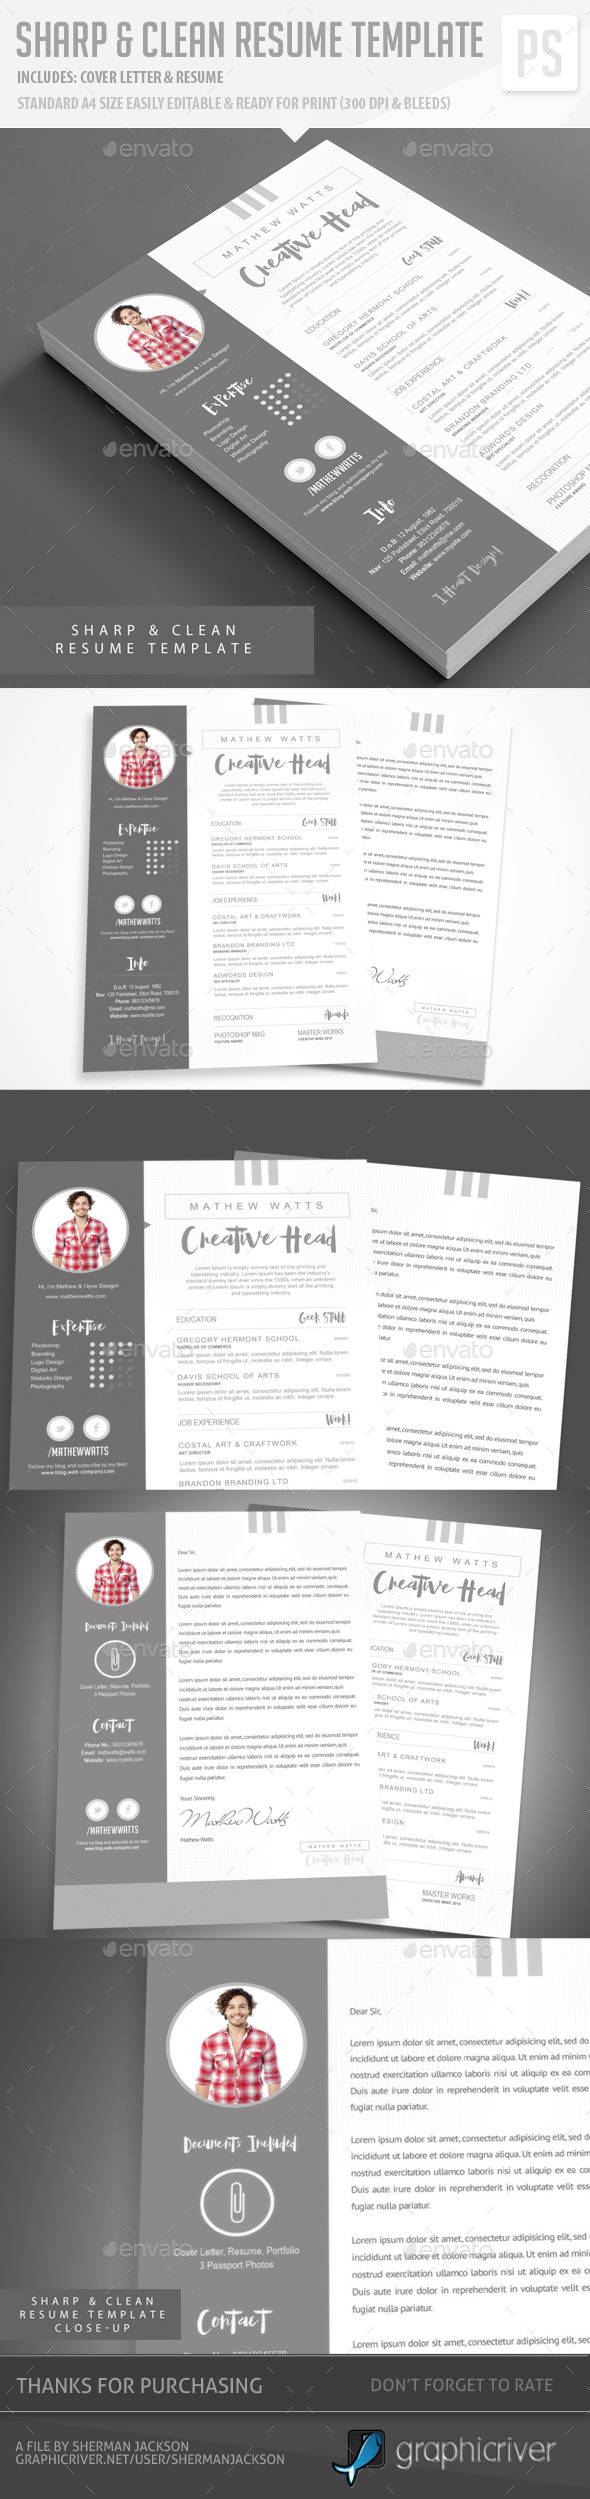 Sharp & Clean Resume for Photoshop